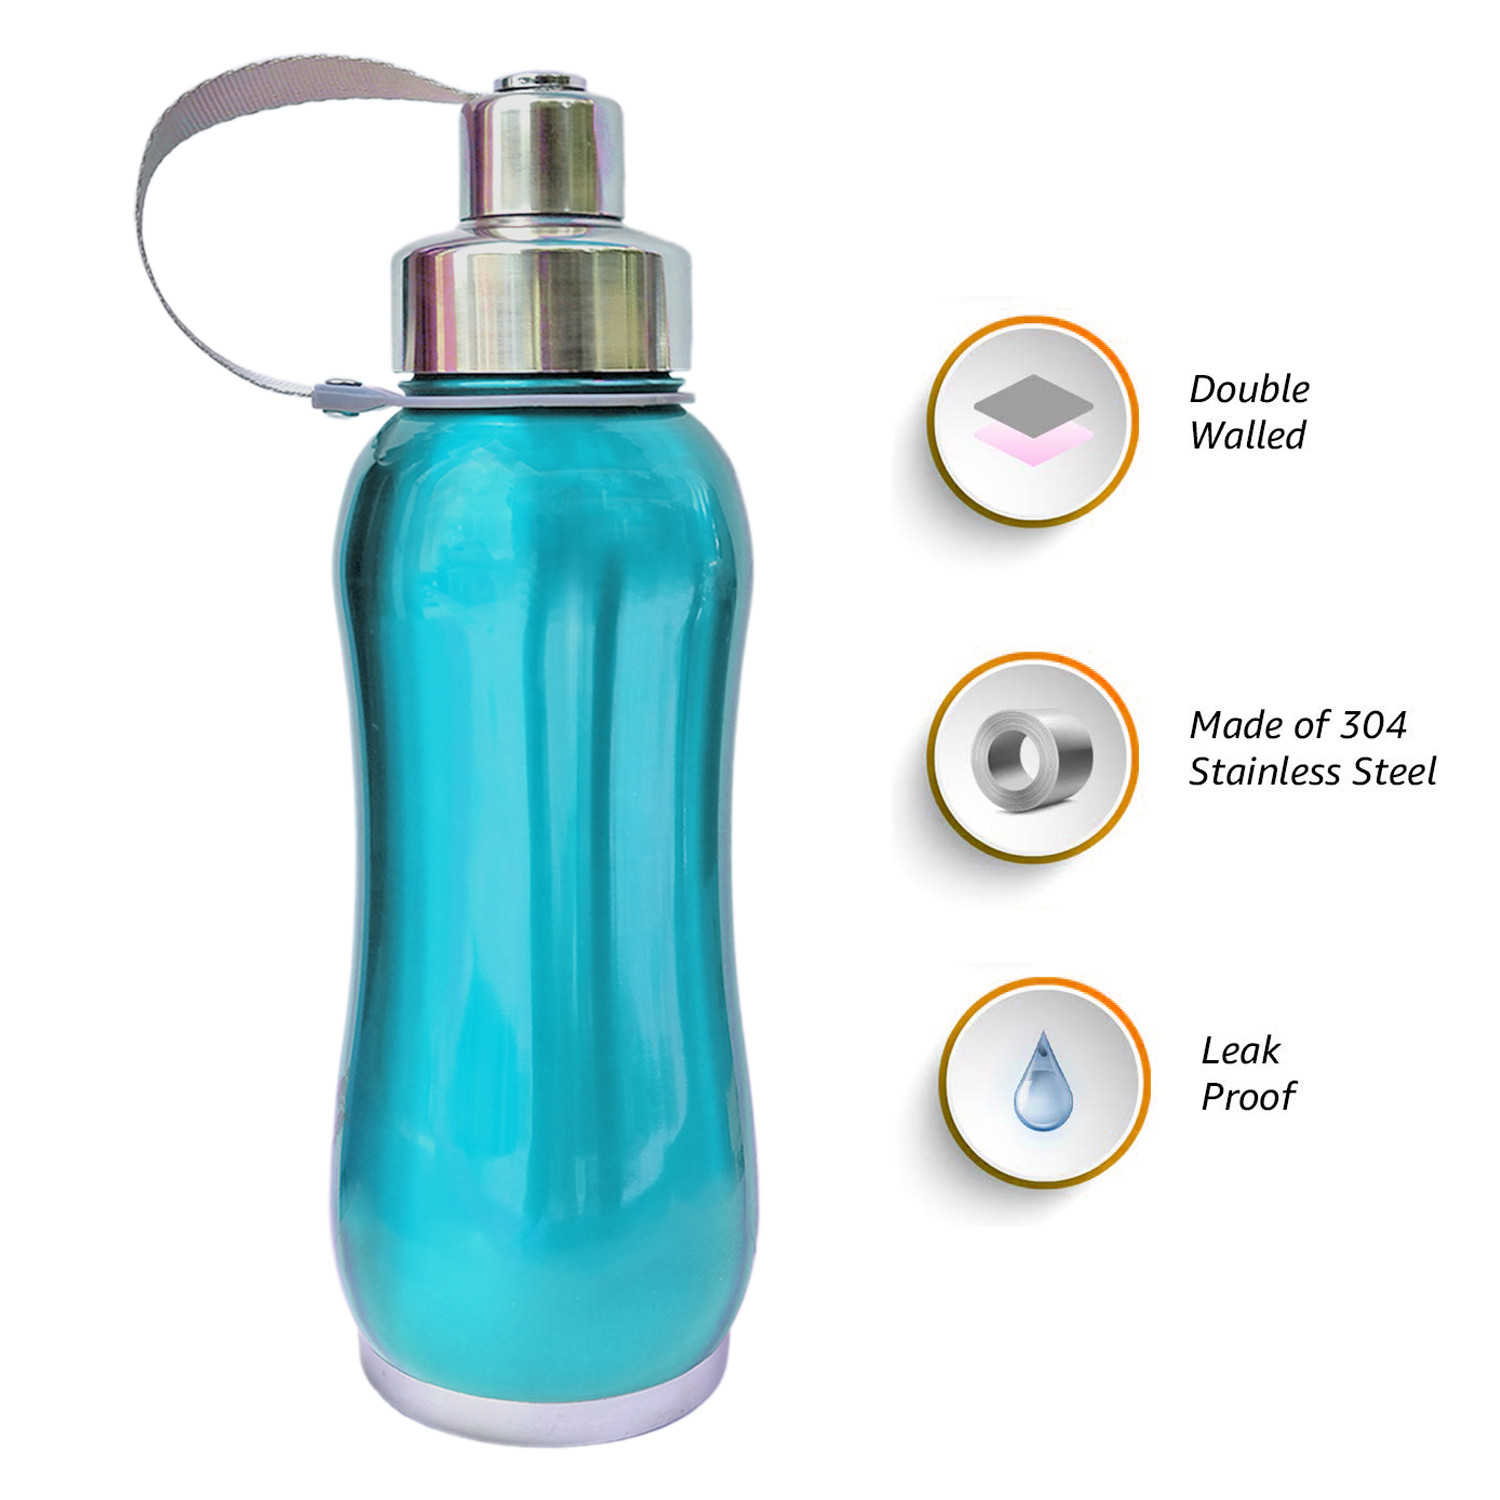 Kuber Industries Stainless Steel Insulated Water Bottle With Strainer For Home & Traveling, 1Ltr. (Blue) 54KM4311